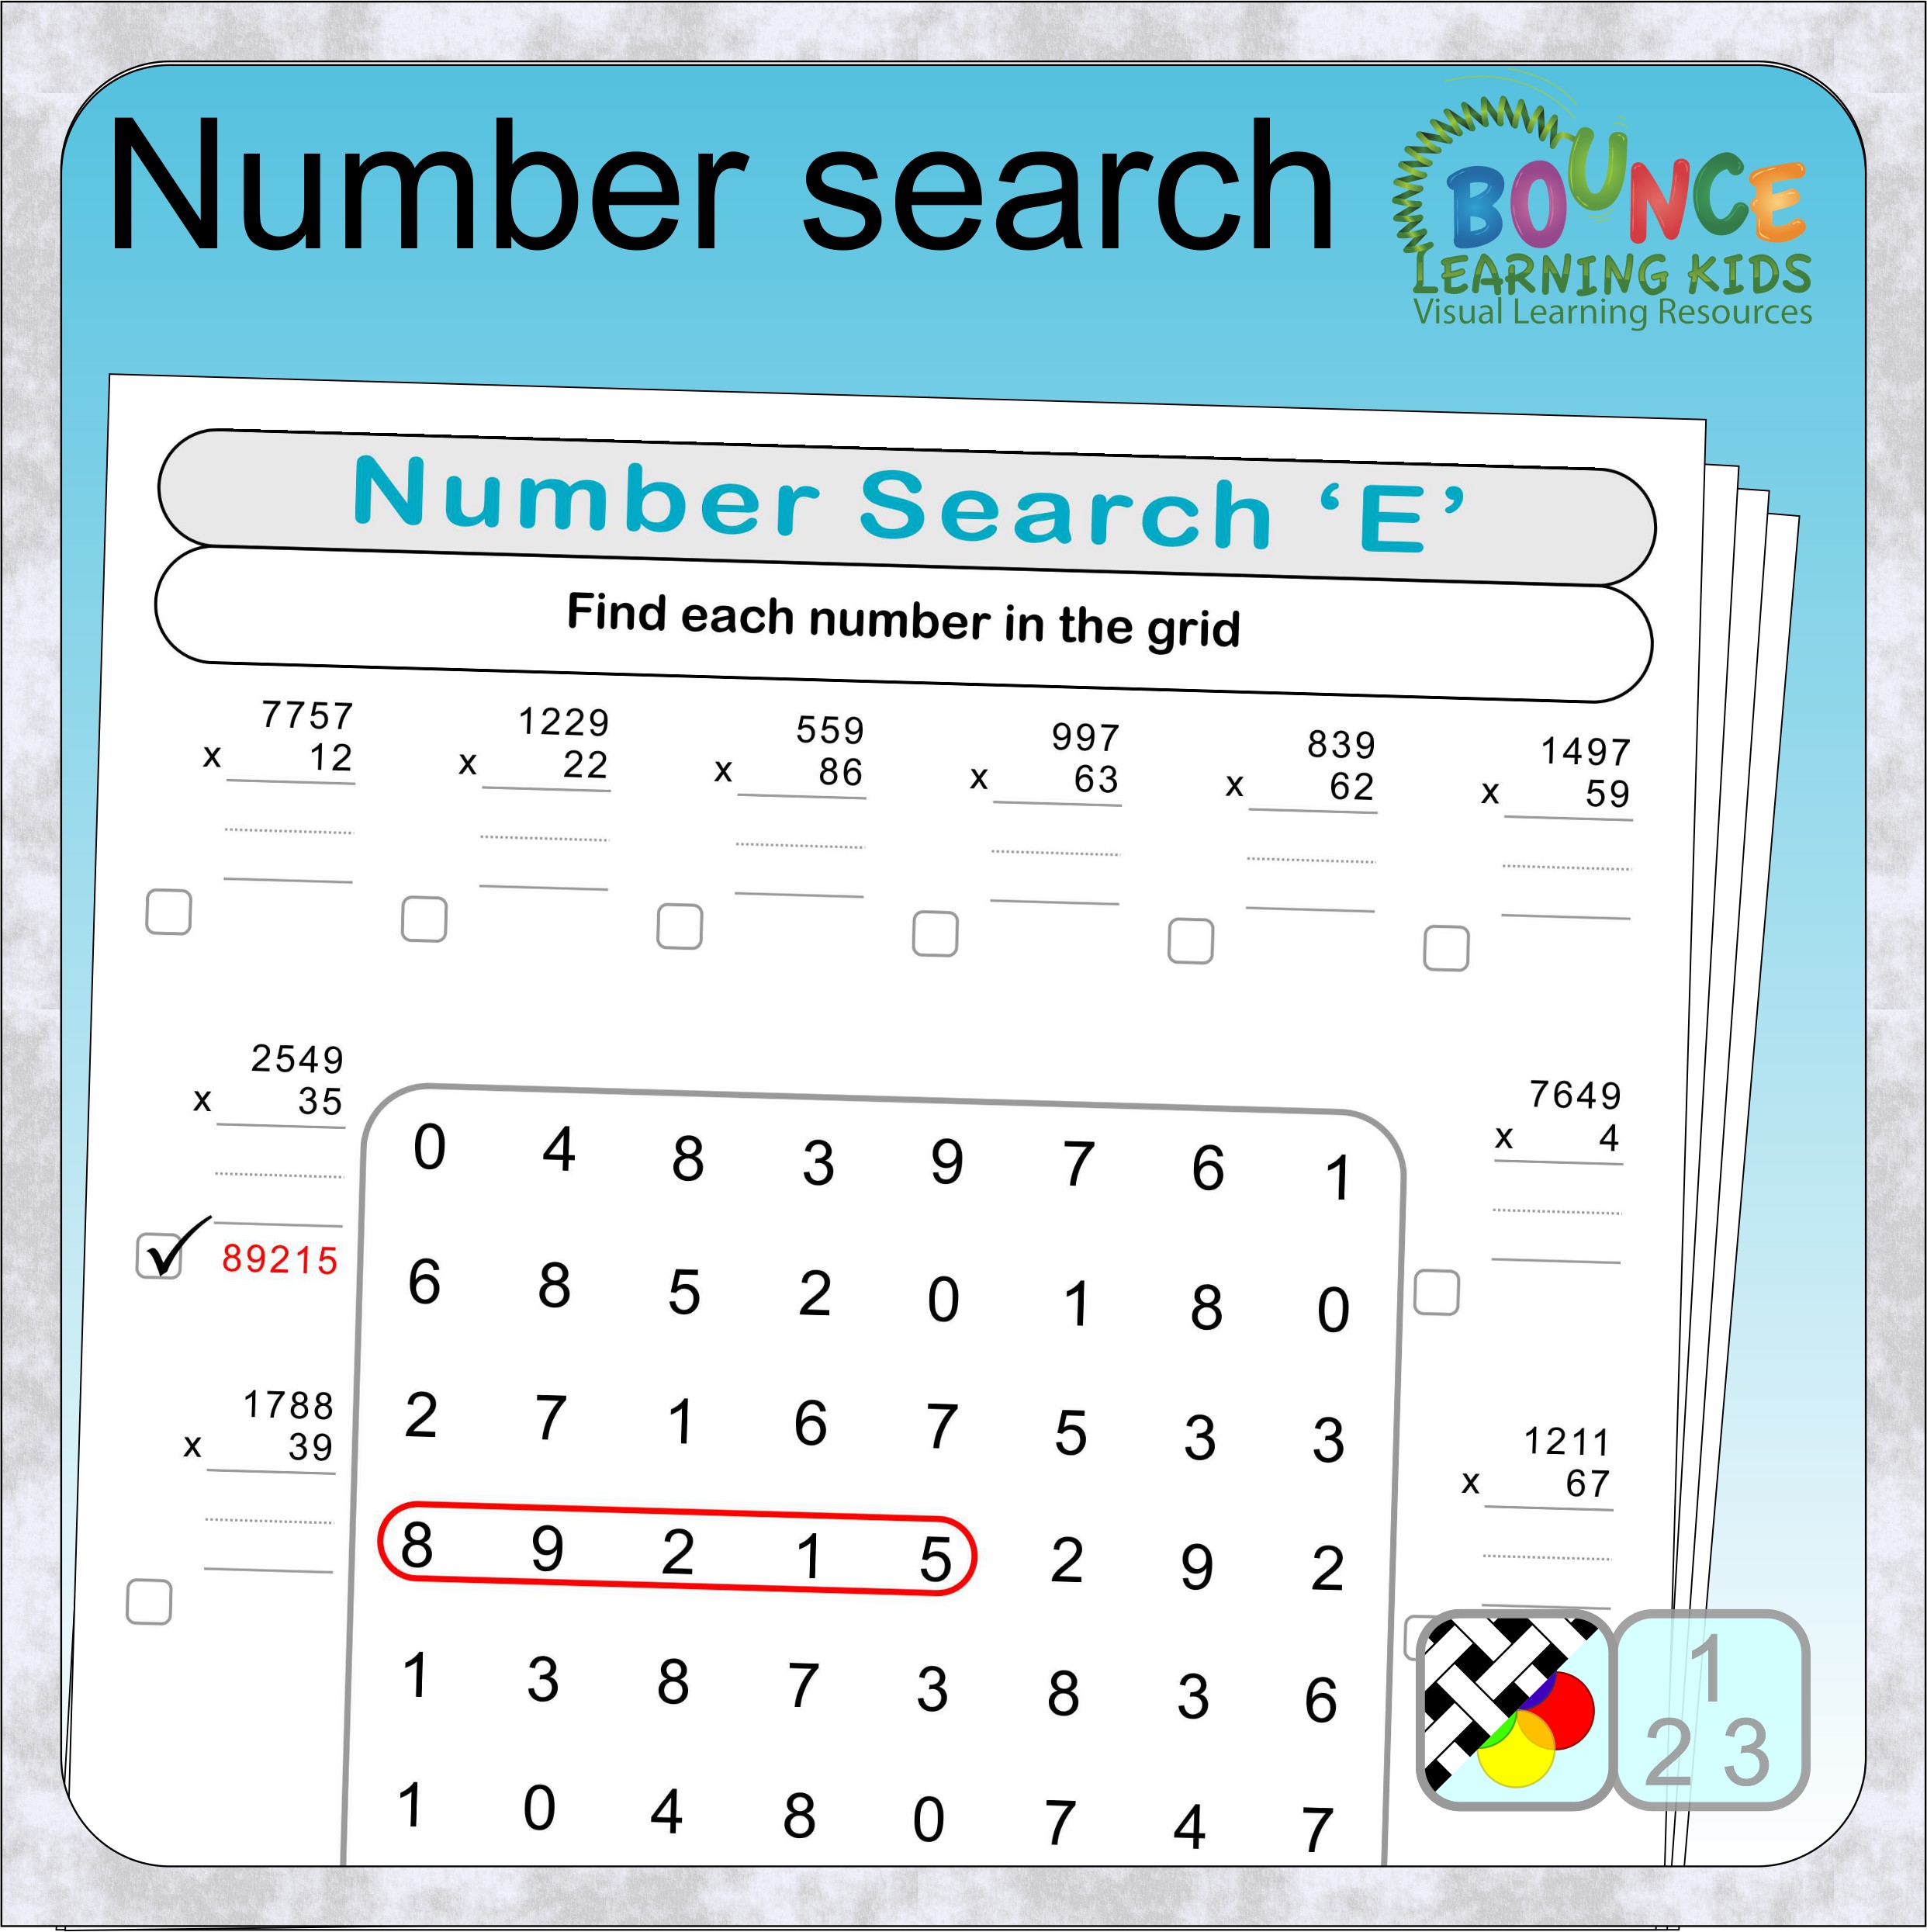 10 fun Number search worksheets to download